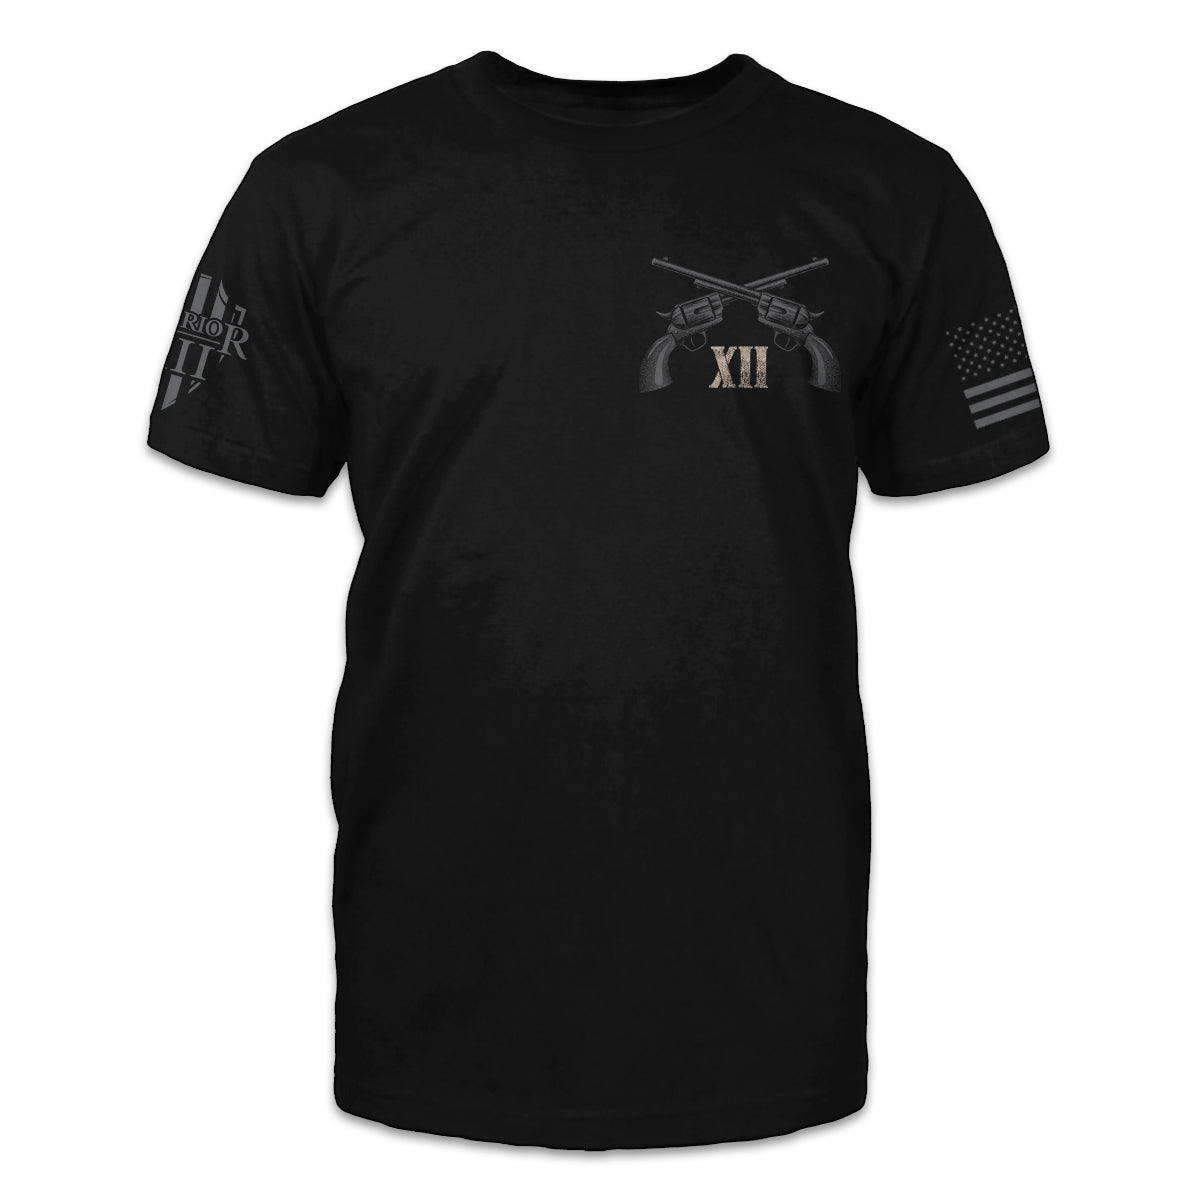 A black t-shirt with two pistols crossed over with the Roman numerals XII printed on the front of the shirt.